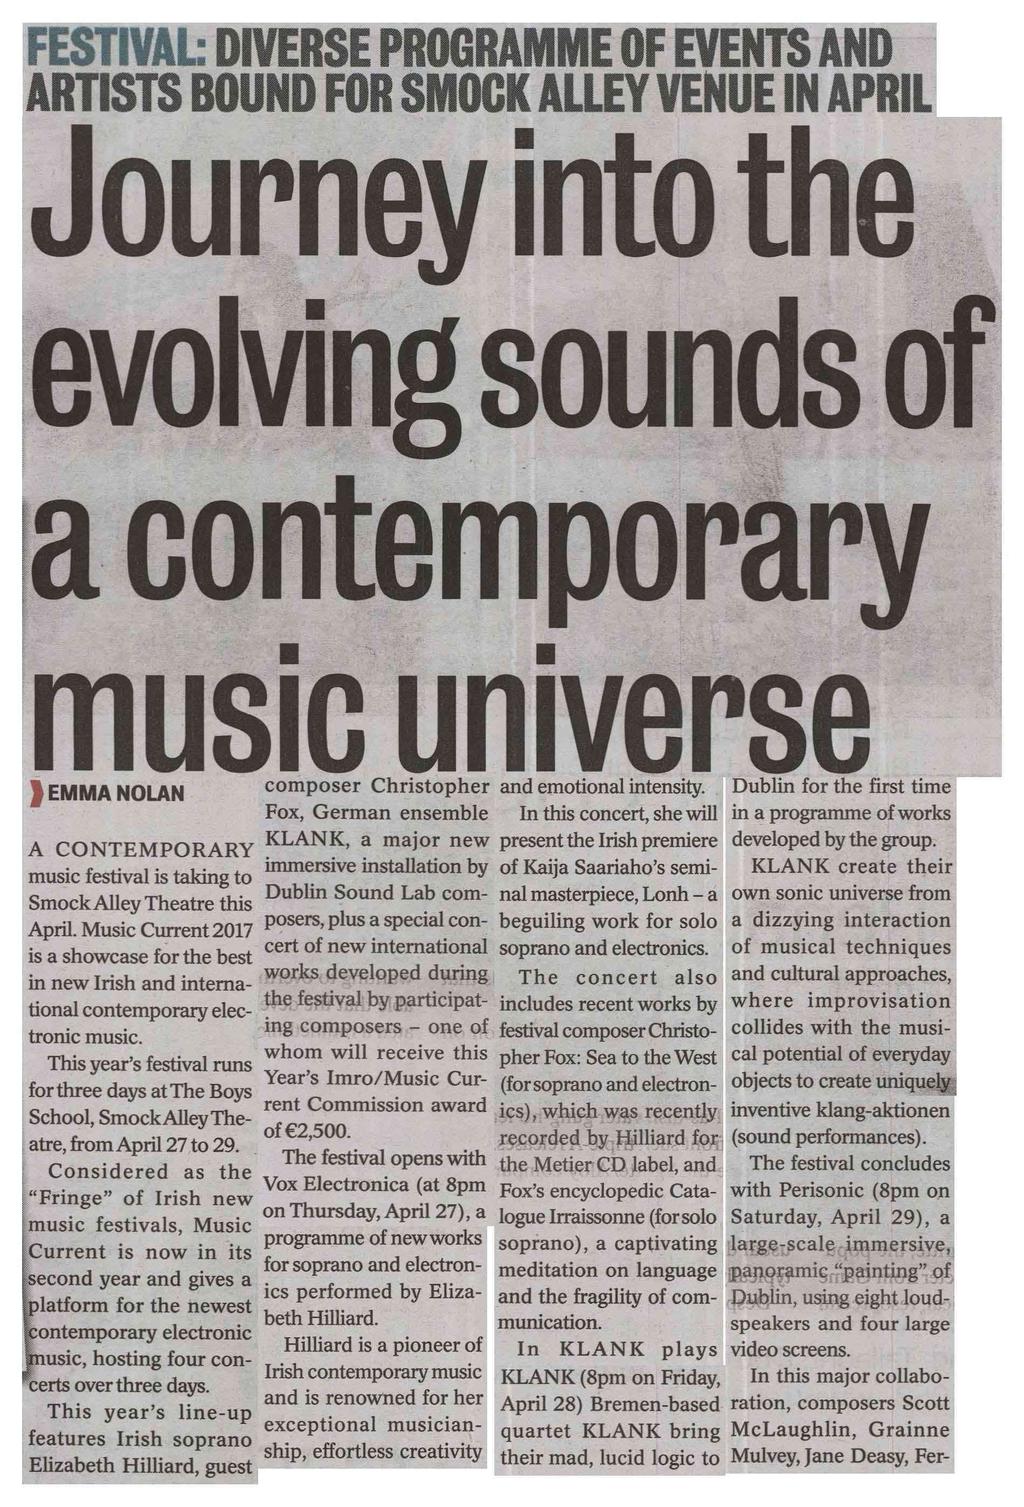 Dundrum Gazette* -24- Area of Clip: 77900mm² Page 1 of 3 FESTIVAL DIVERSE PROGRAMME OF EVENTS AND ARTISTS BOUND FOR SMOCK ALLEY VENUE IN APRIL Journey into the evolving sounds of a contemporary music